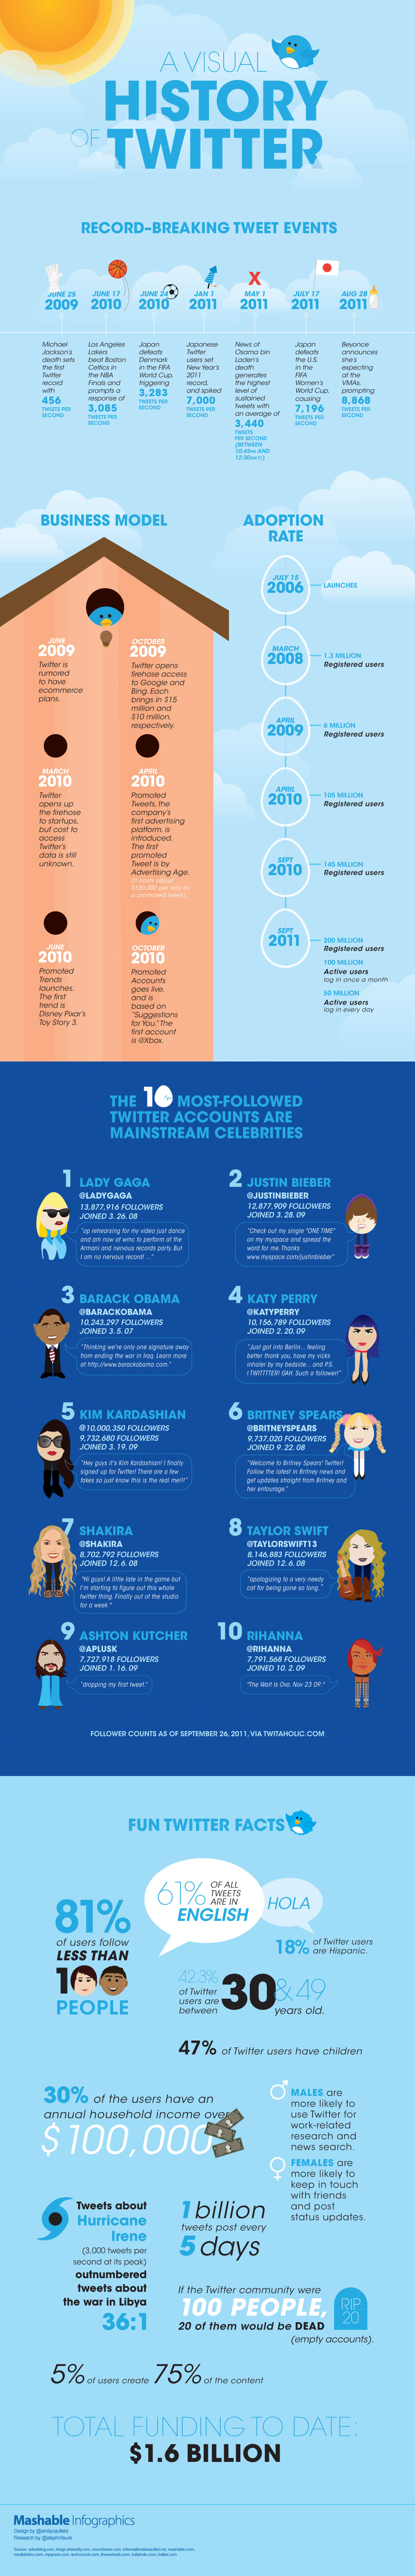 Twitter History infographic